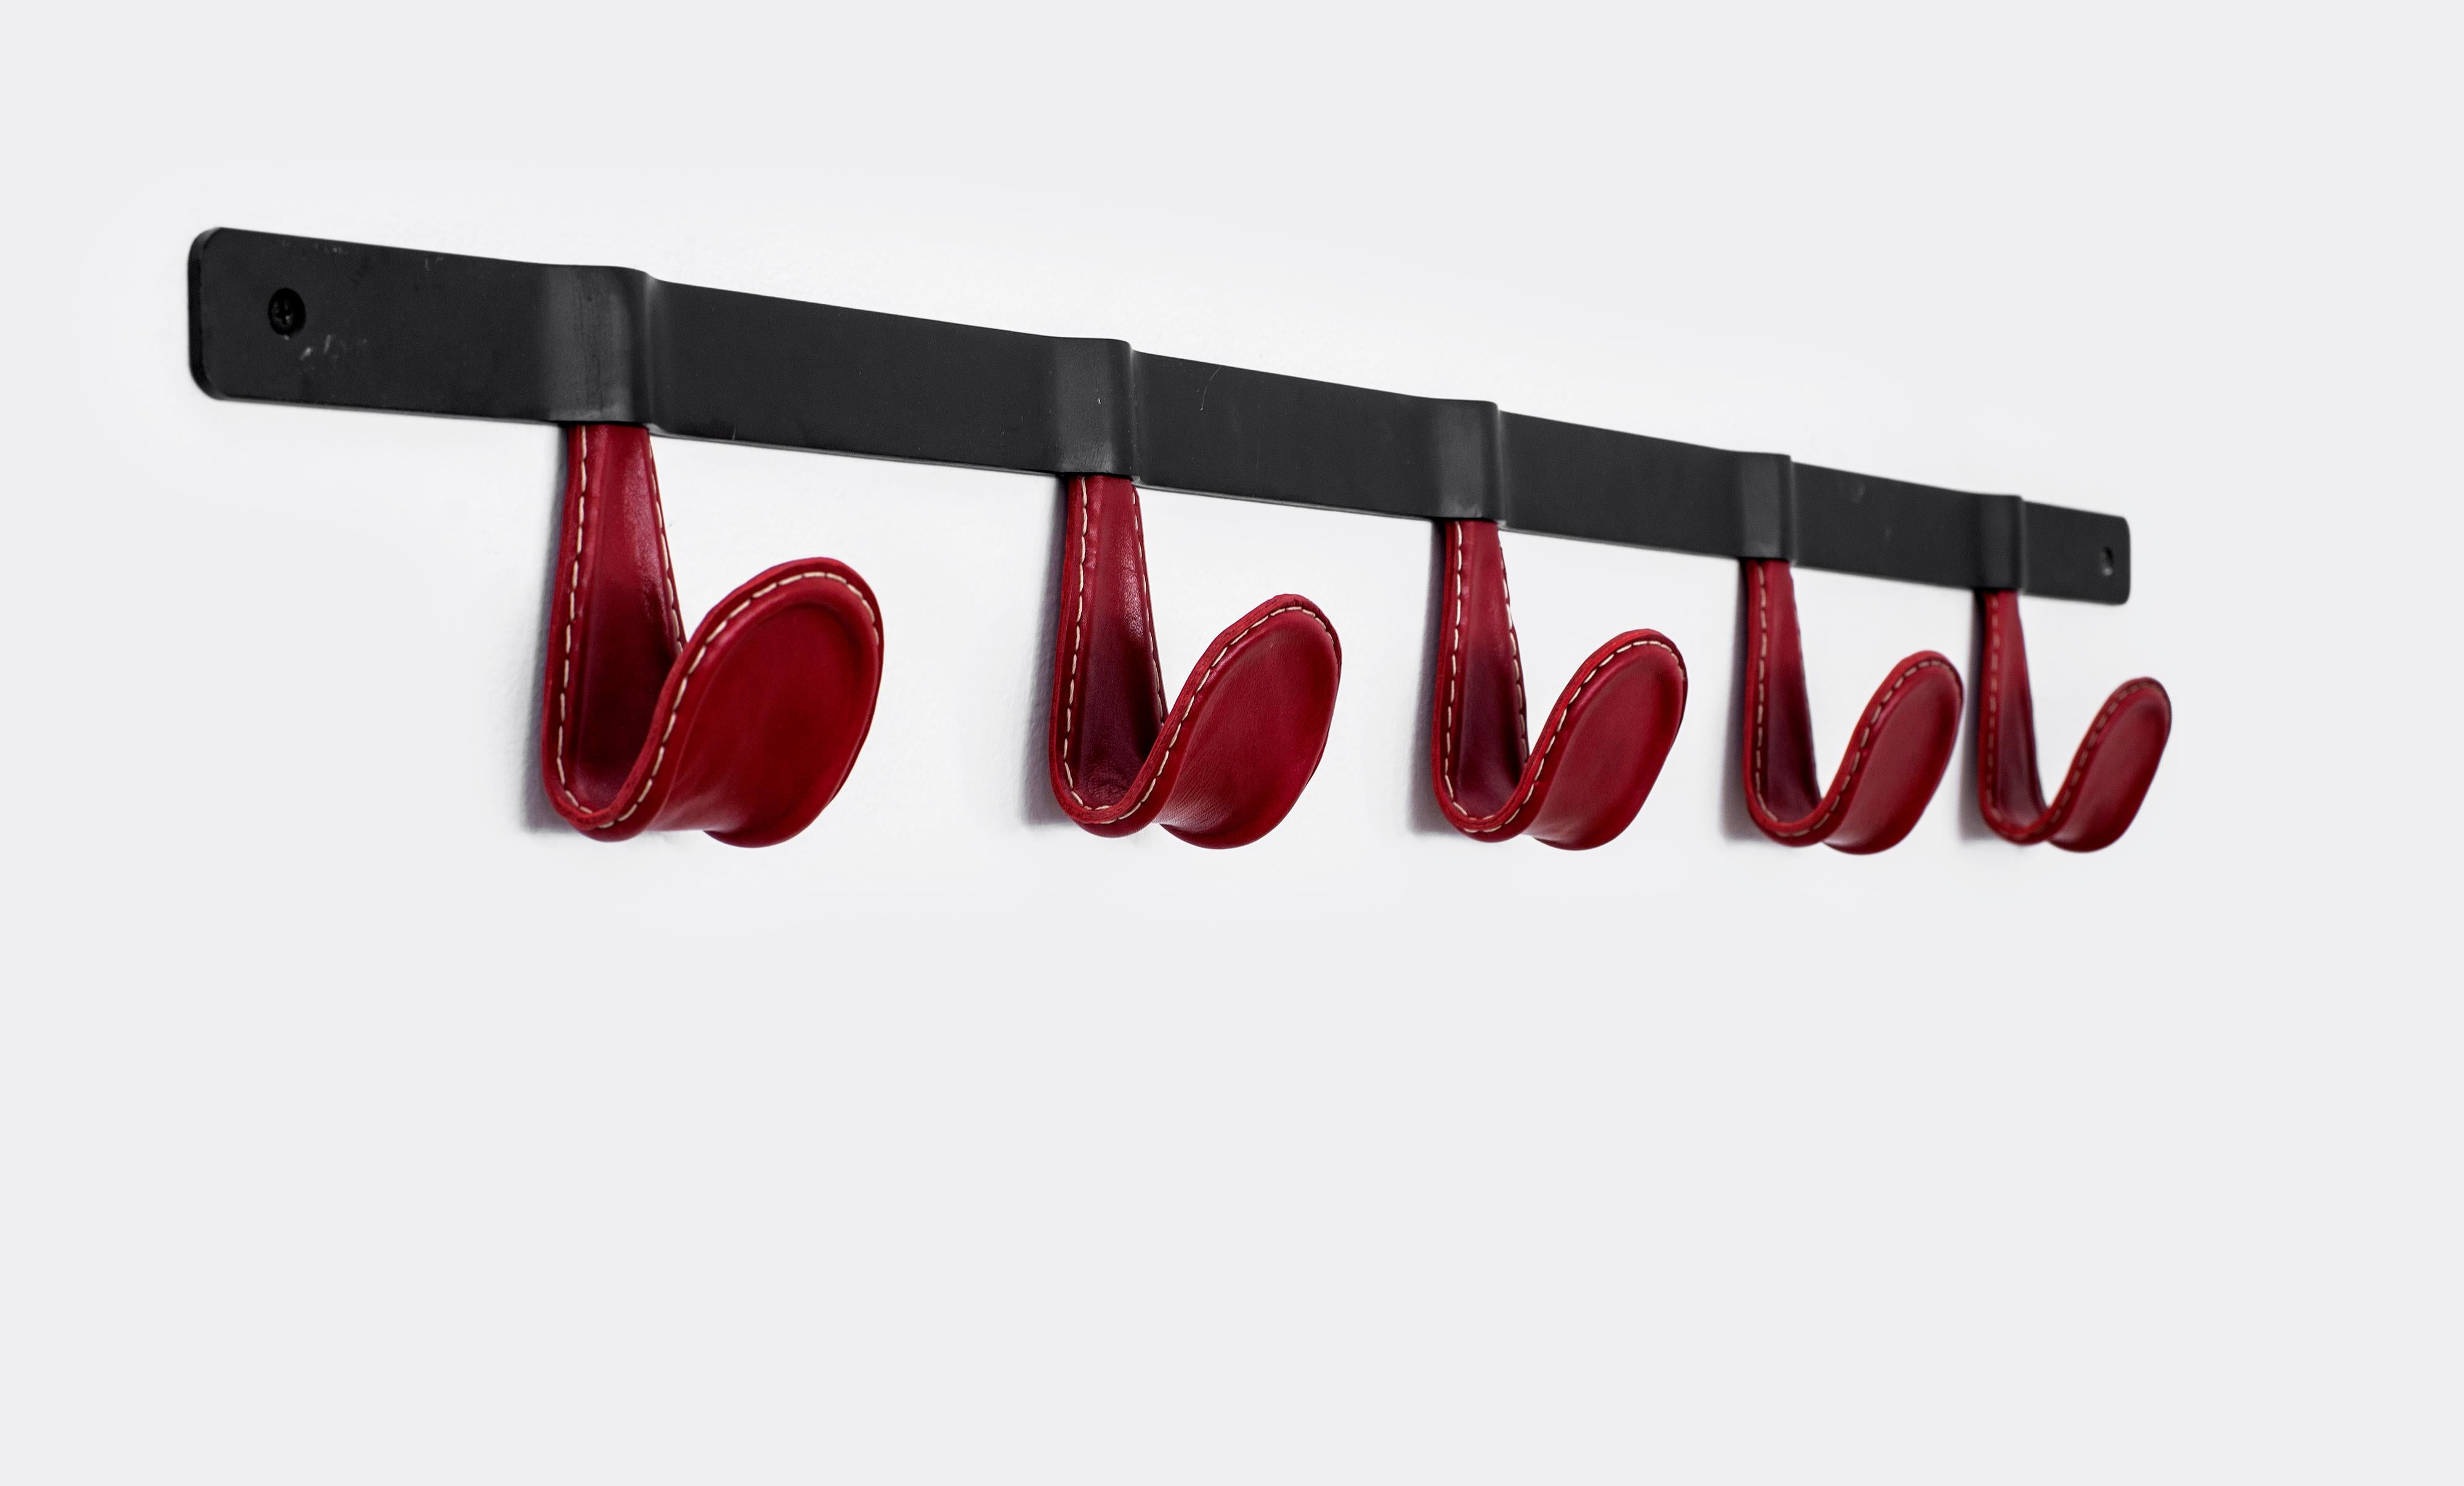 Beautiful five hook iron and leather wrapped coat rack. Each hook covered in red leather with white contrast stitching. Newly produced by Orange furniture, multiple quantities and other colors available.